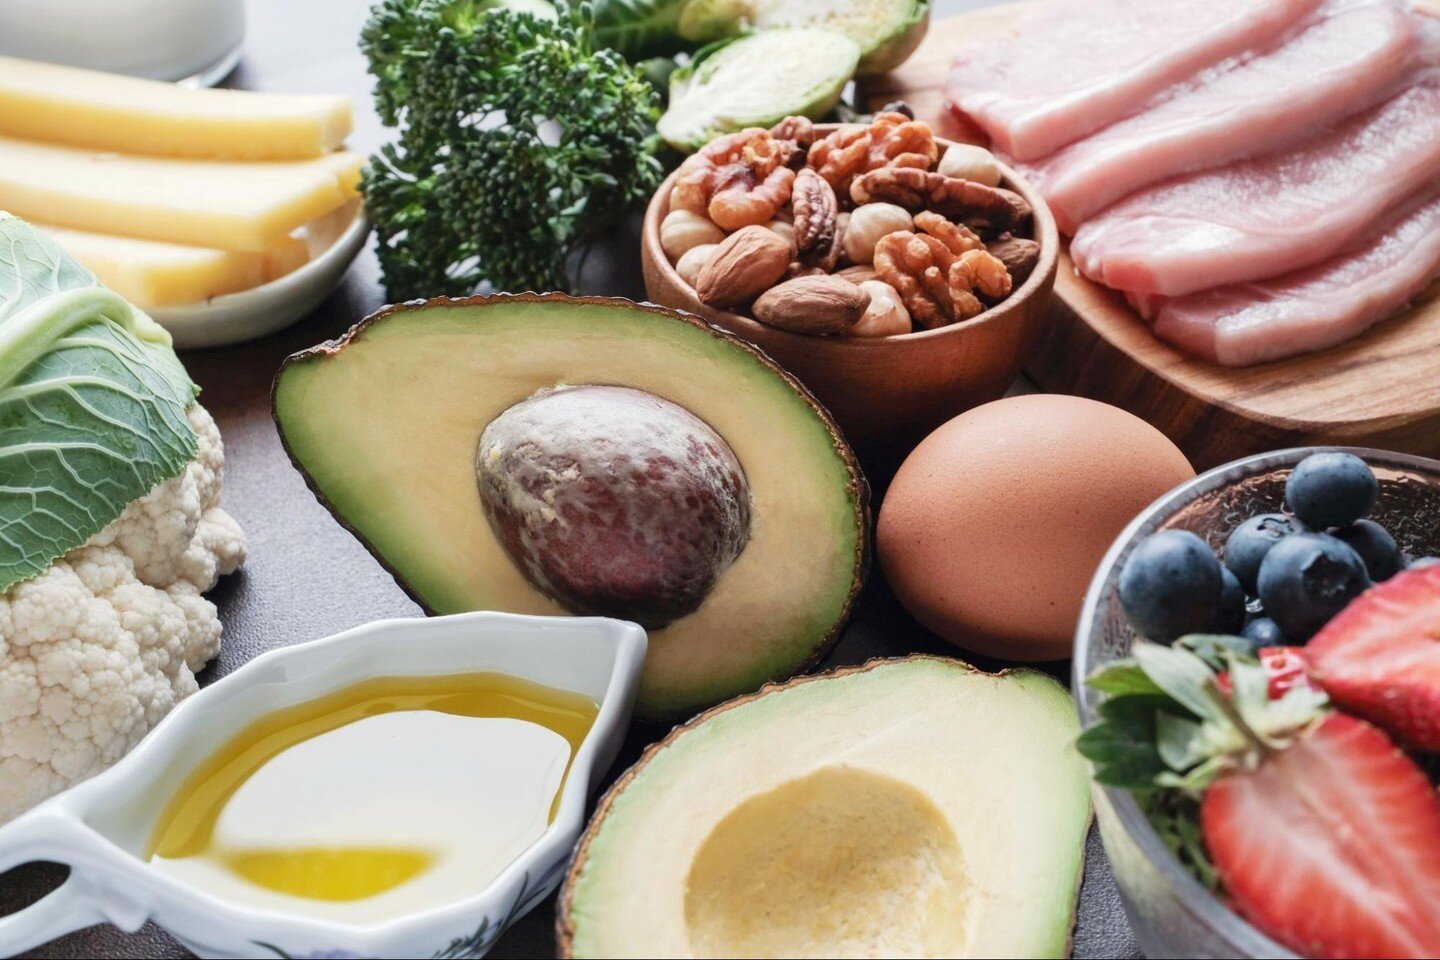 Happy Healthy Fats Day from Ascend MD! 🌟 Today, we're celebrating the incredible benefits of healthy fats and how our IV therapies can provide similar nourishment and support for your body.

🌿 Healthy fats, such as those found in avocados, nuts, an